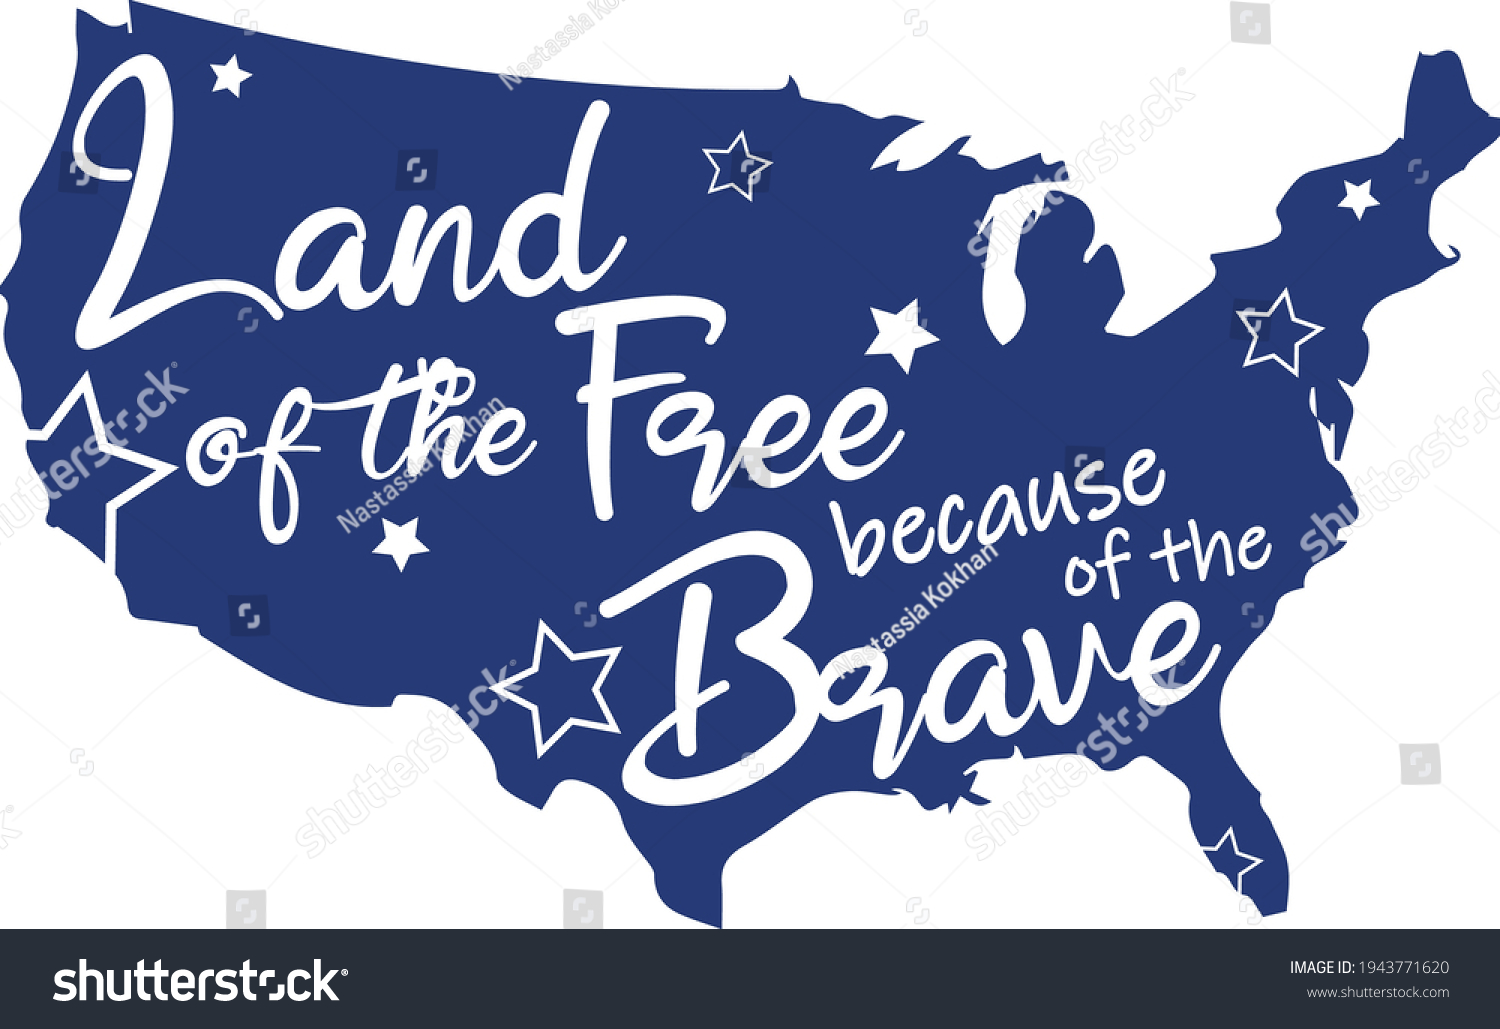 SVG of 4th of July Svg vector Illustration isolated on white background. Independence day party decor for design shirt and scrapbooking.Land of the free because of the brave svg